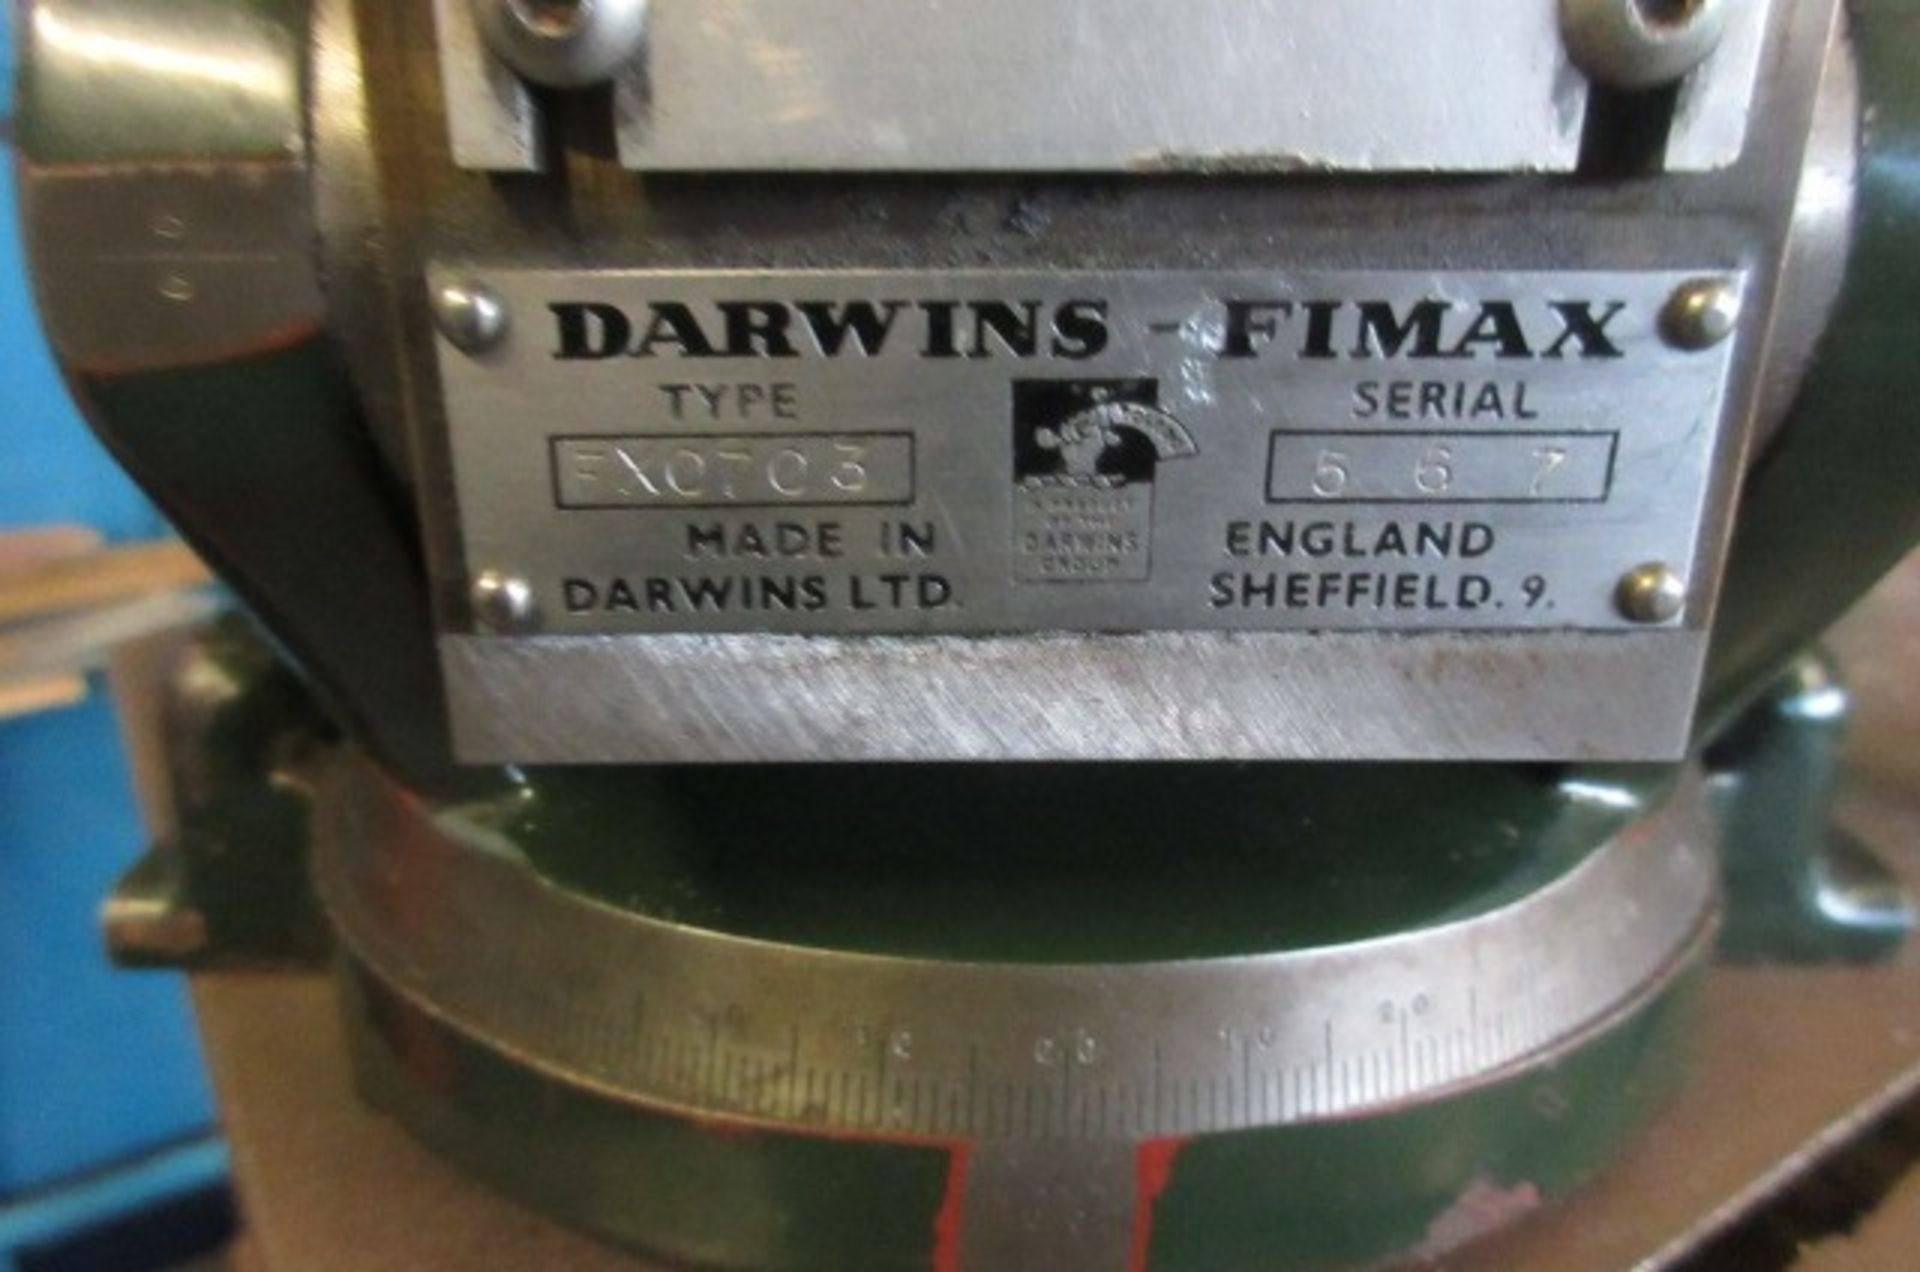 Darwins-Fimax FX0703 universal magnetic chuck - Image 3 of 3